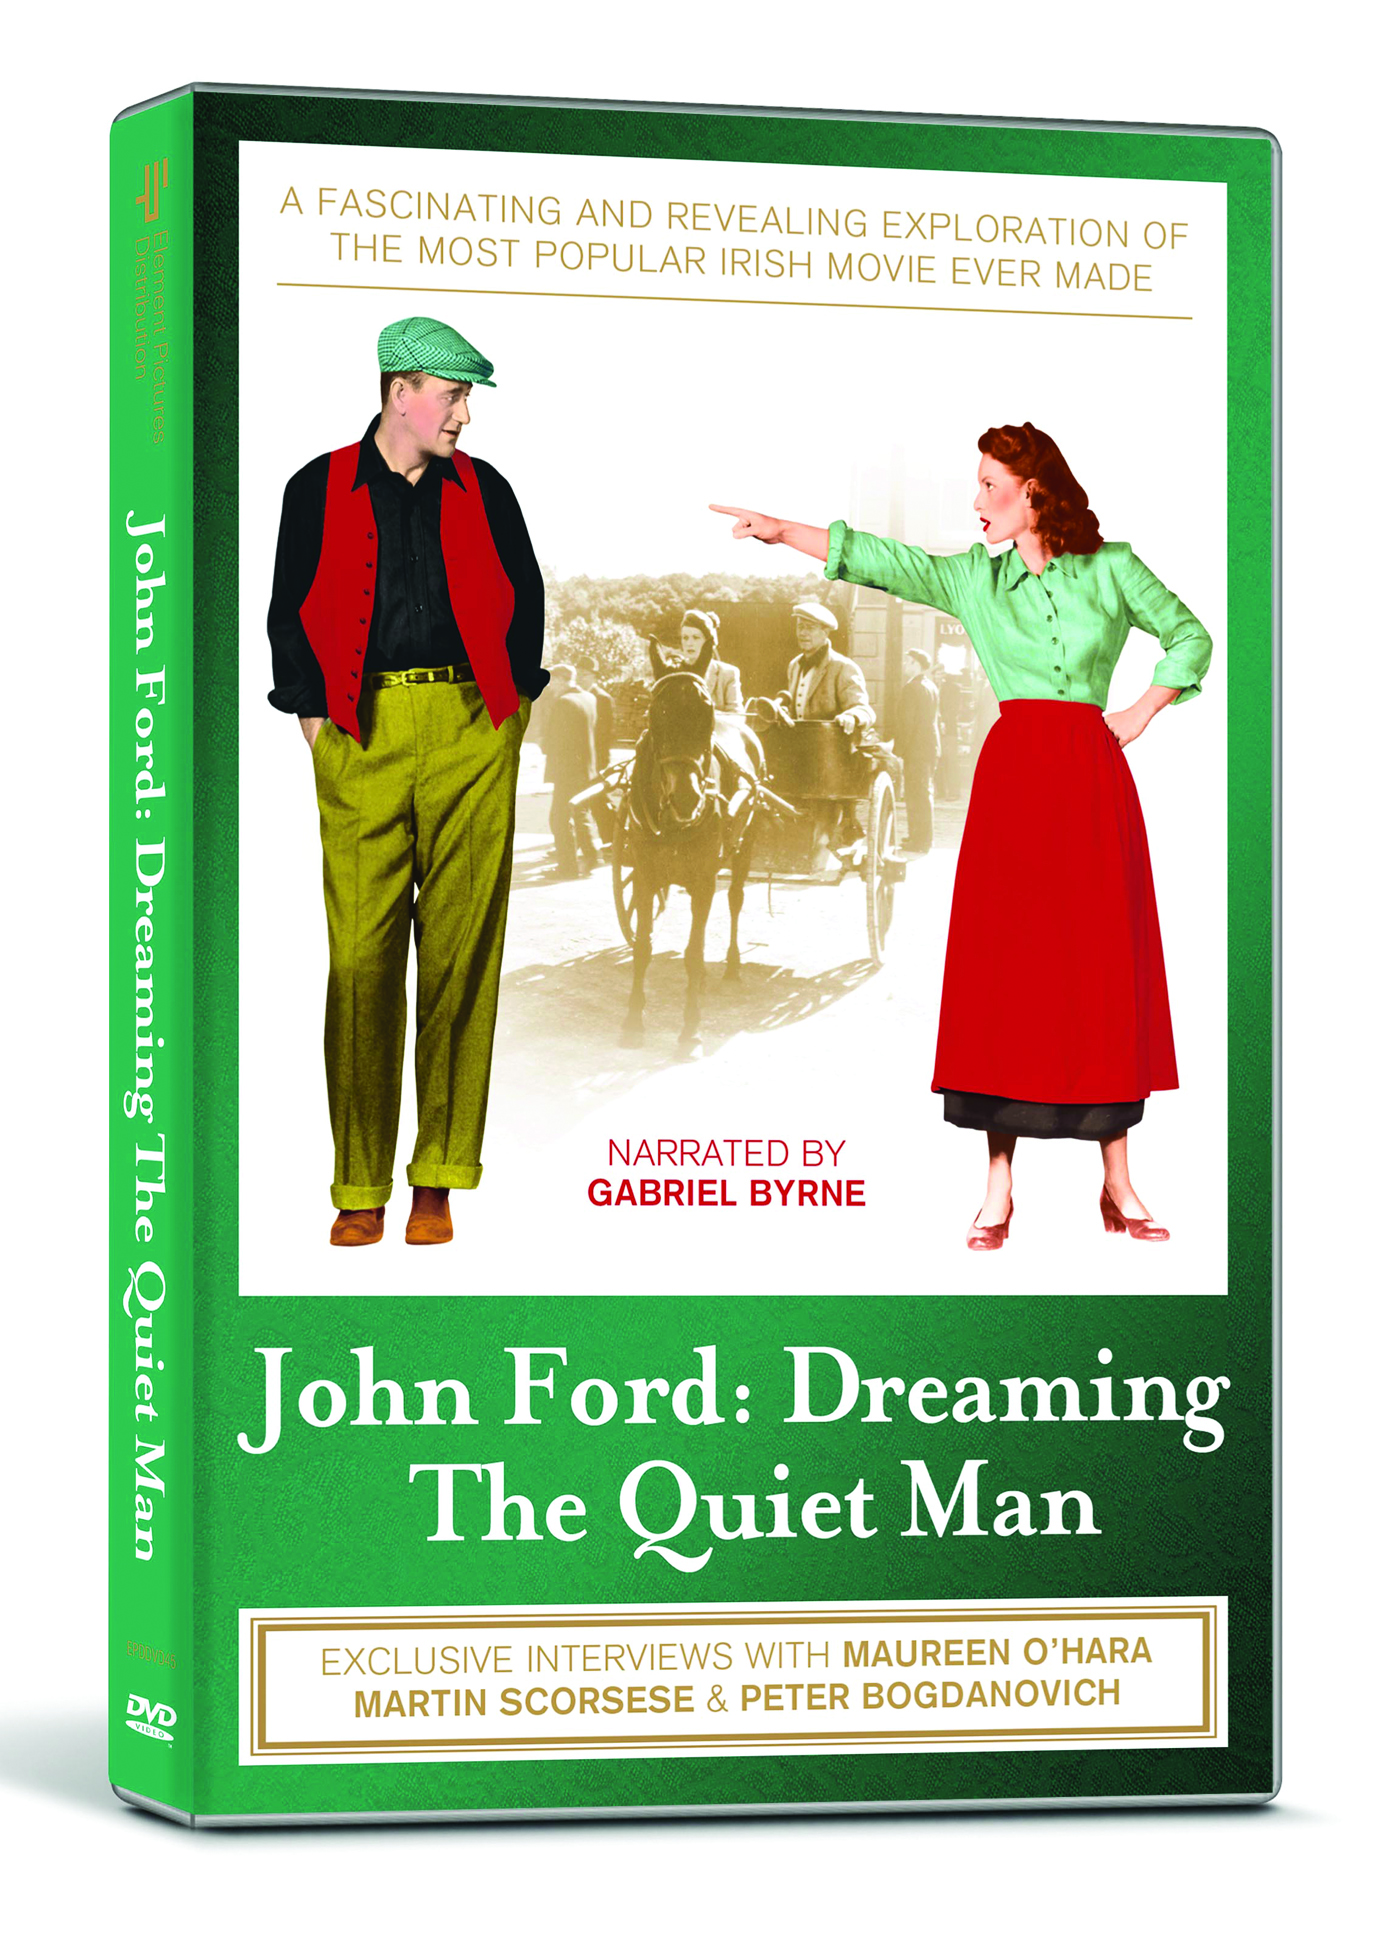 John Ford: Dreaming The Quiet Man